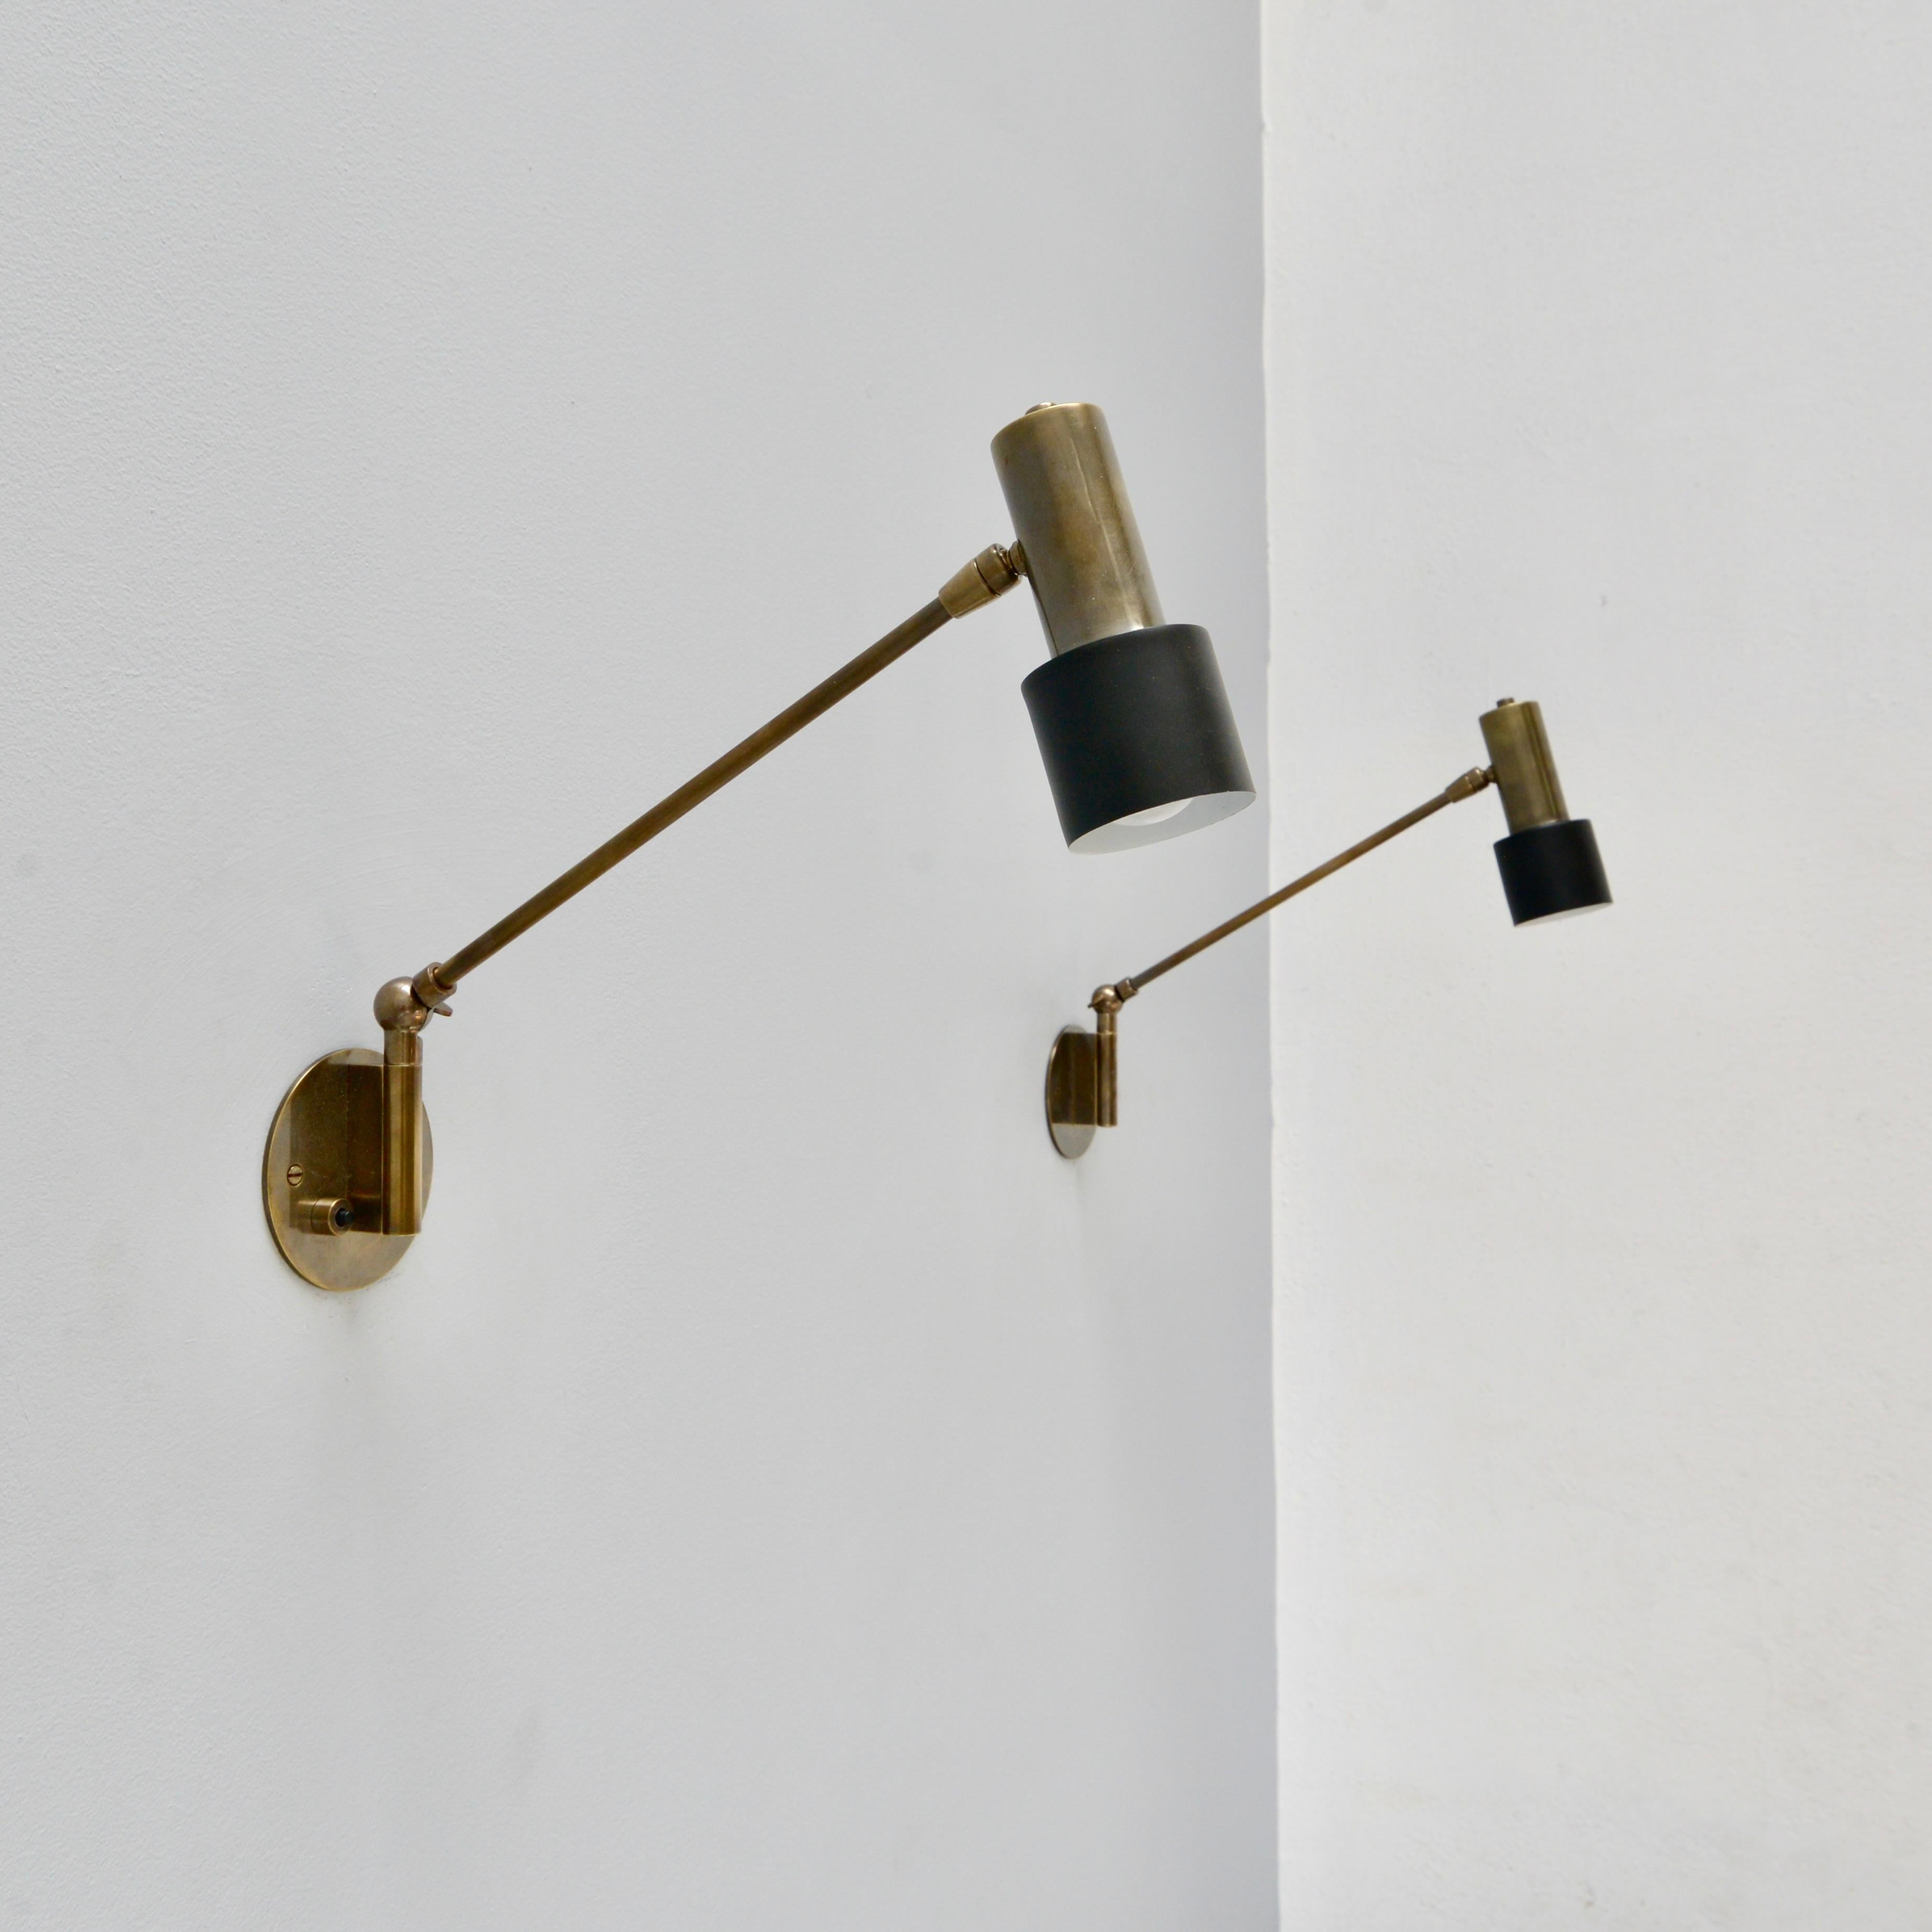 Beautiful patinated brass MicroLU Full Swing (FS) articulating wall sconce by Lumfardo Luminaires. Made contemporary in the US. In all brass patinated finish with push switch. Multiples available for order. Wired with (1) E26 medium based socket. It